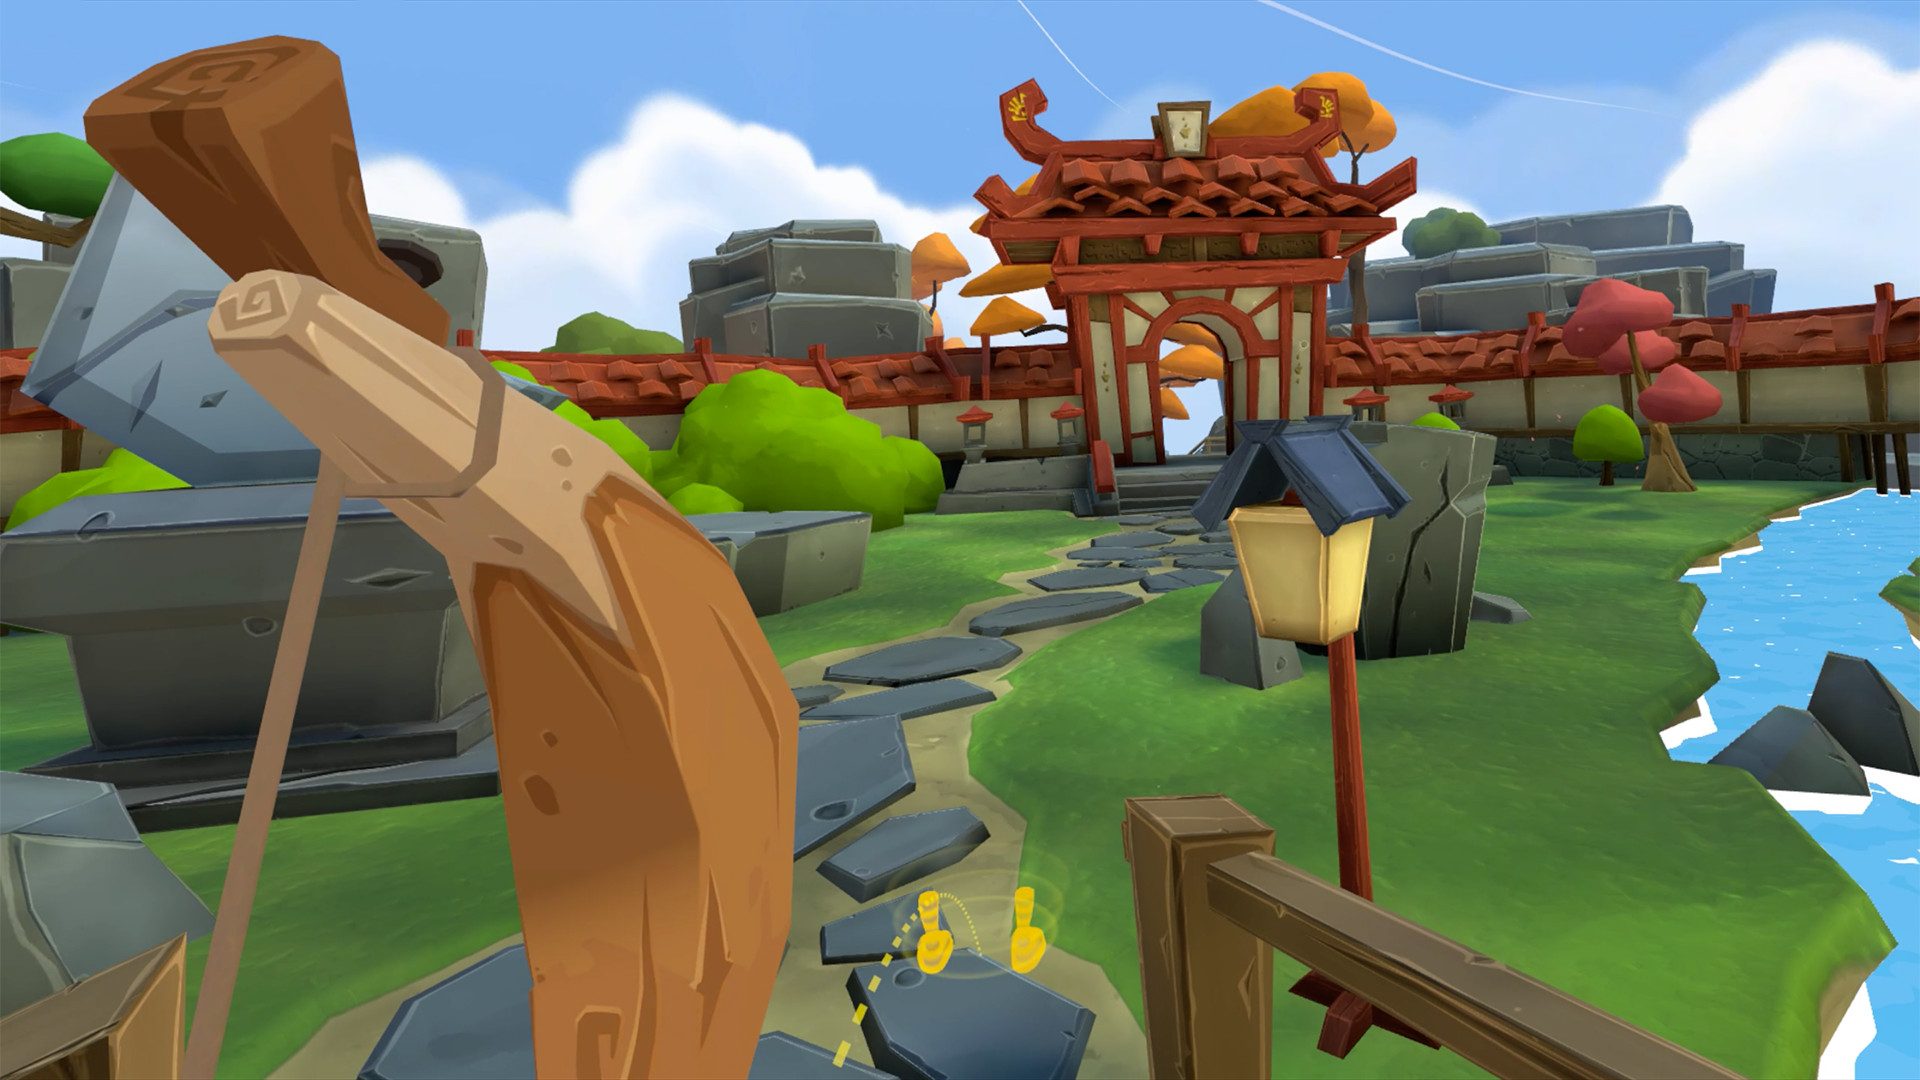 Fruit Ninja VR' Early Access Review: A Reimagined Classic